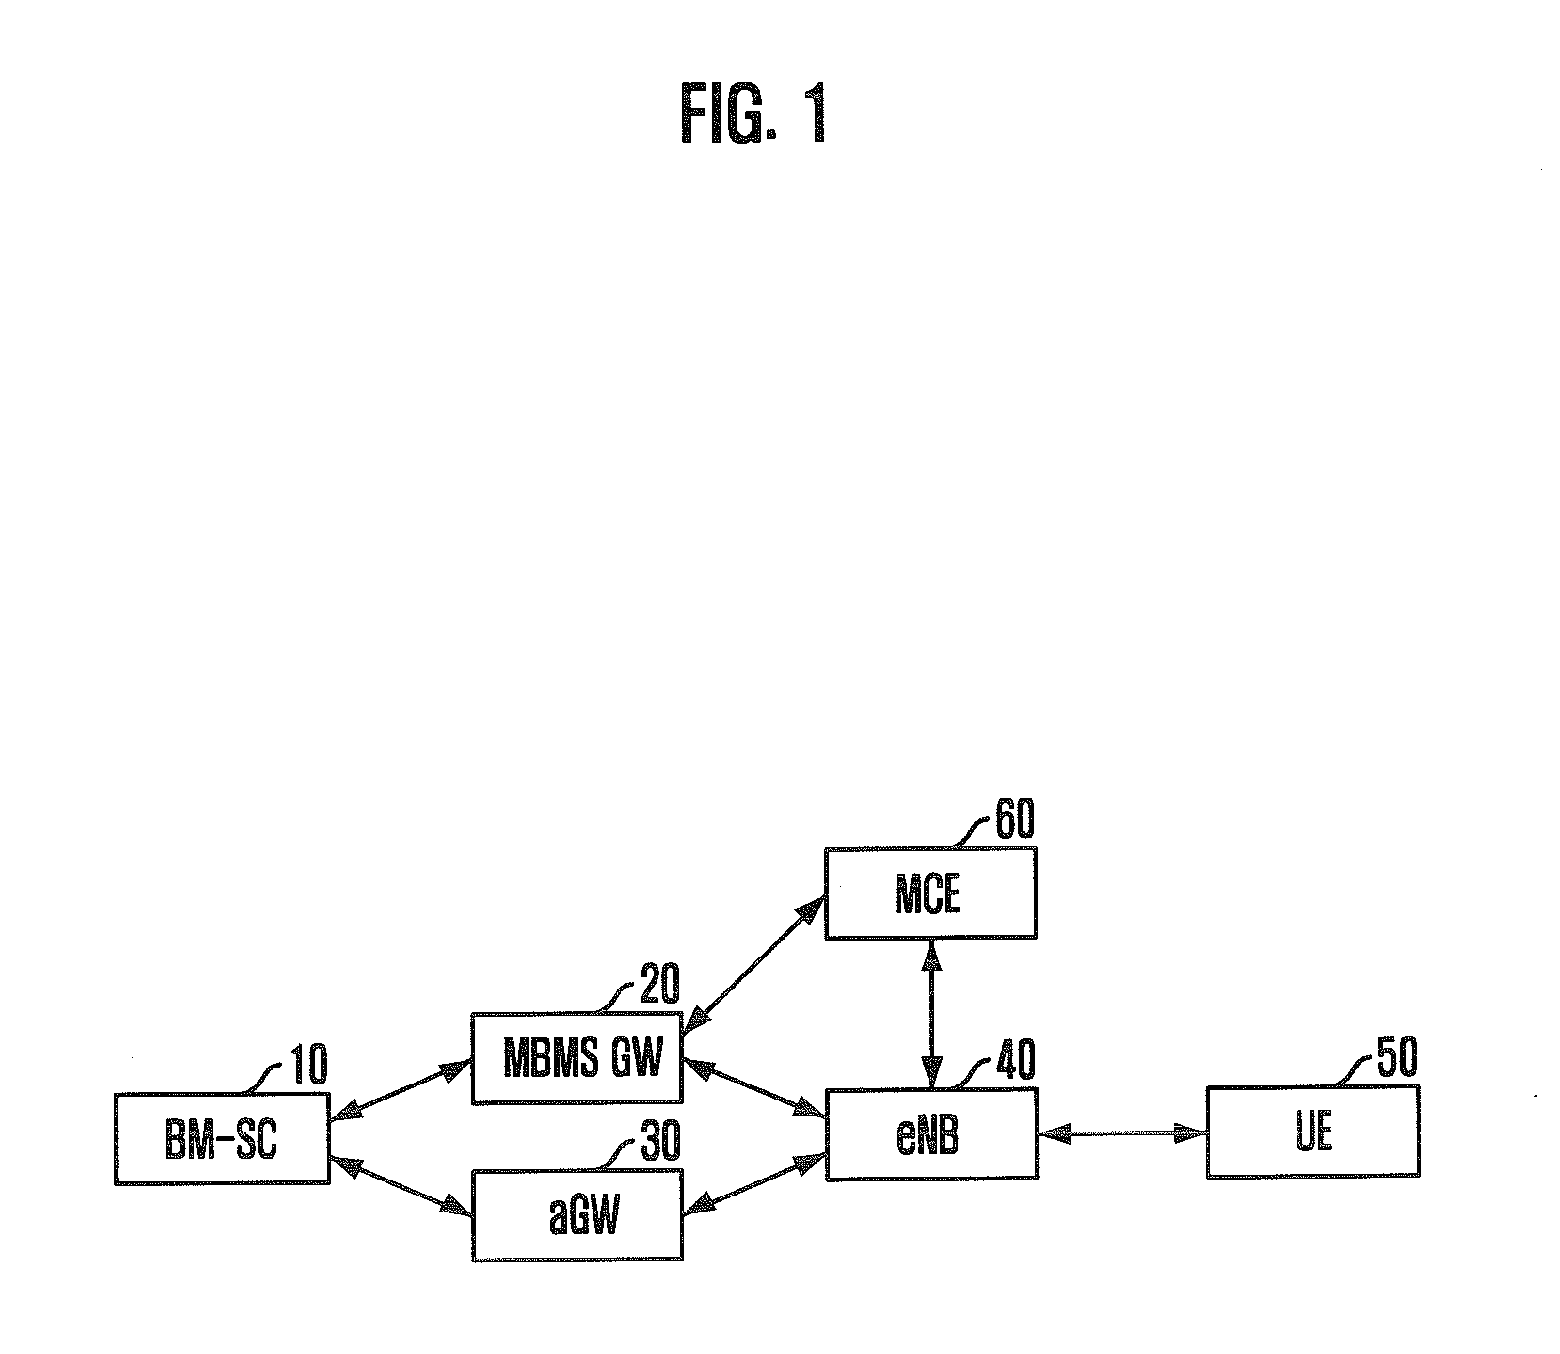 MBMS data transmission and receiving in packet based on mobile communication system